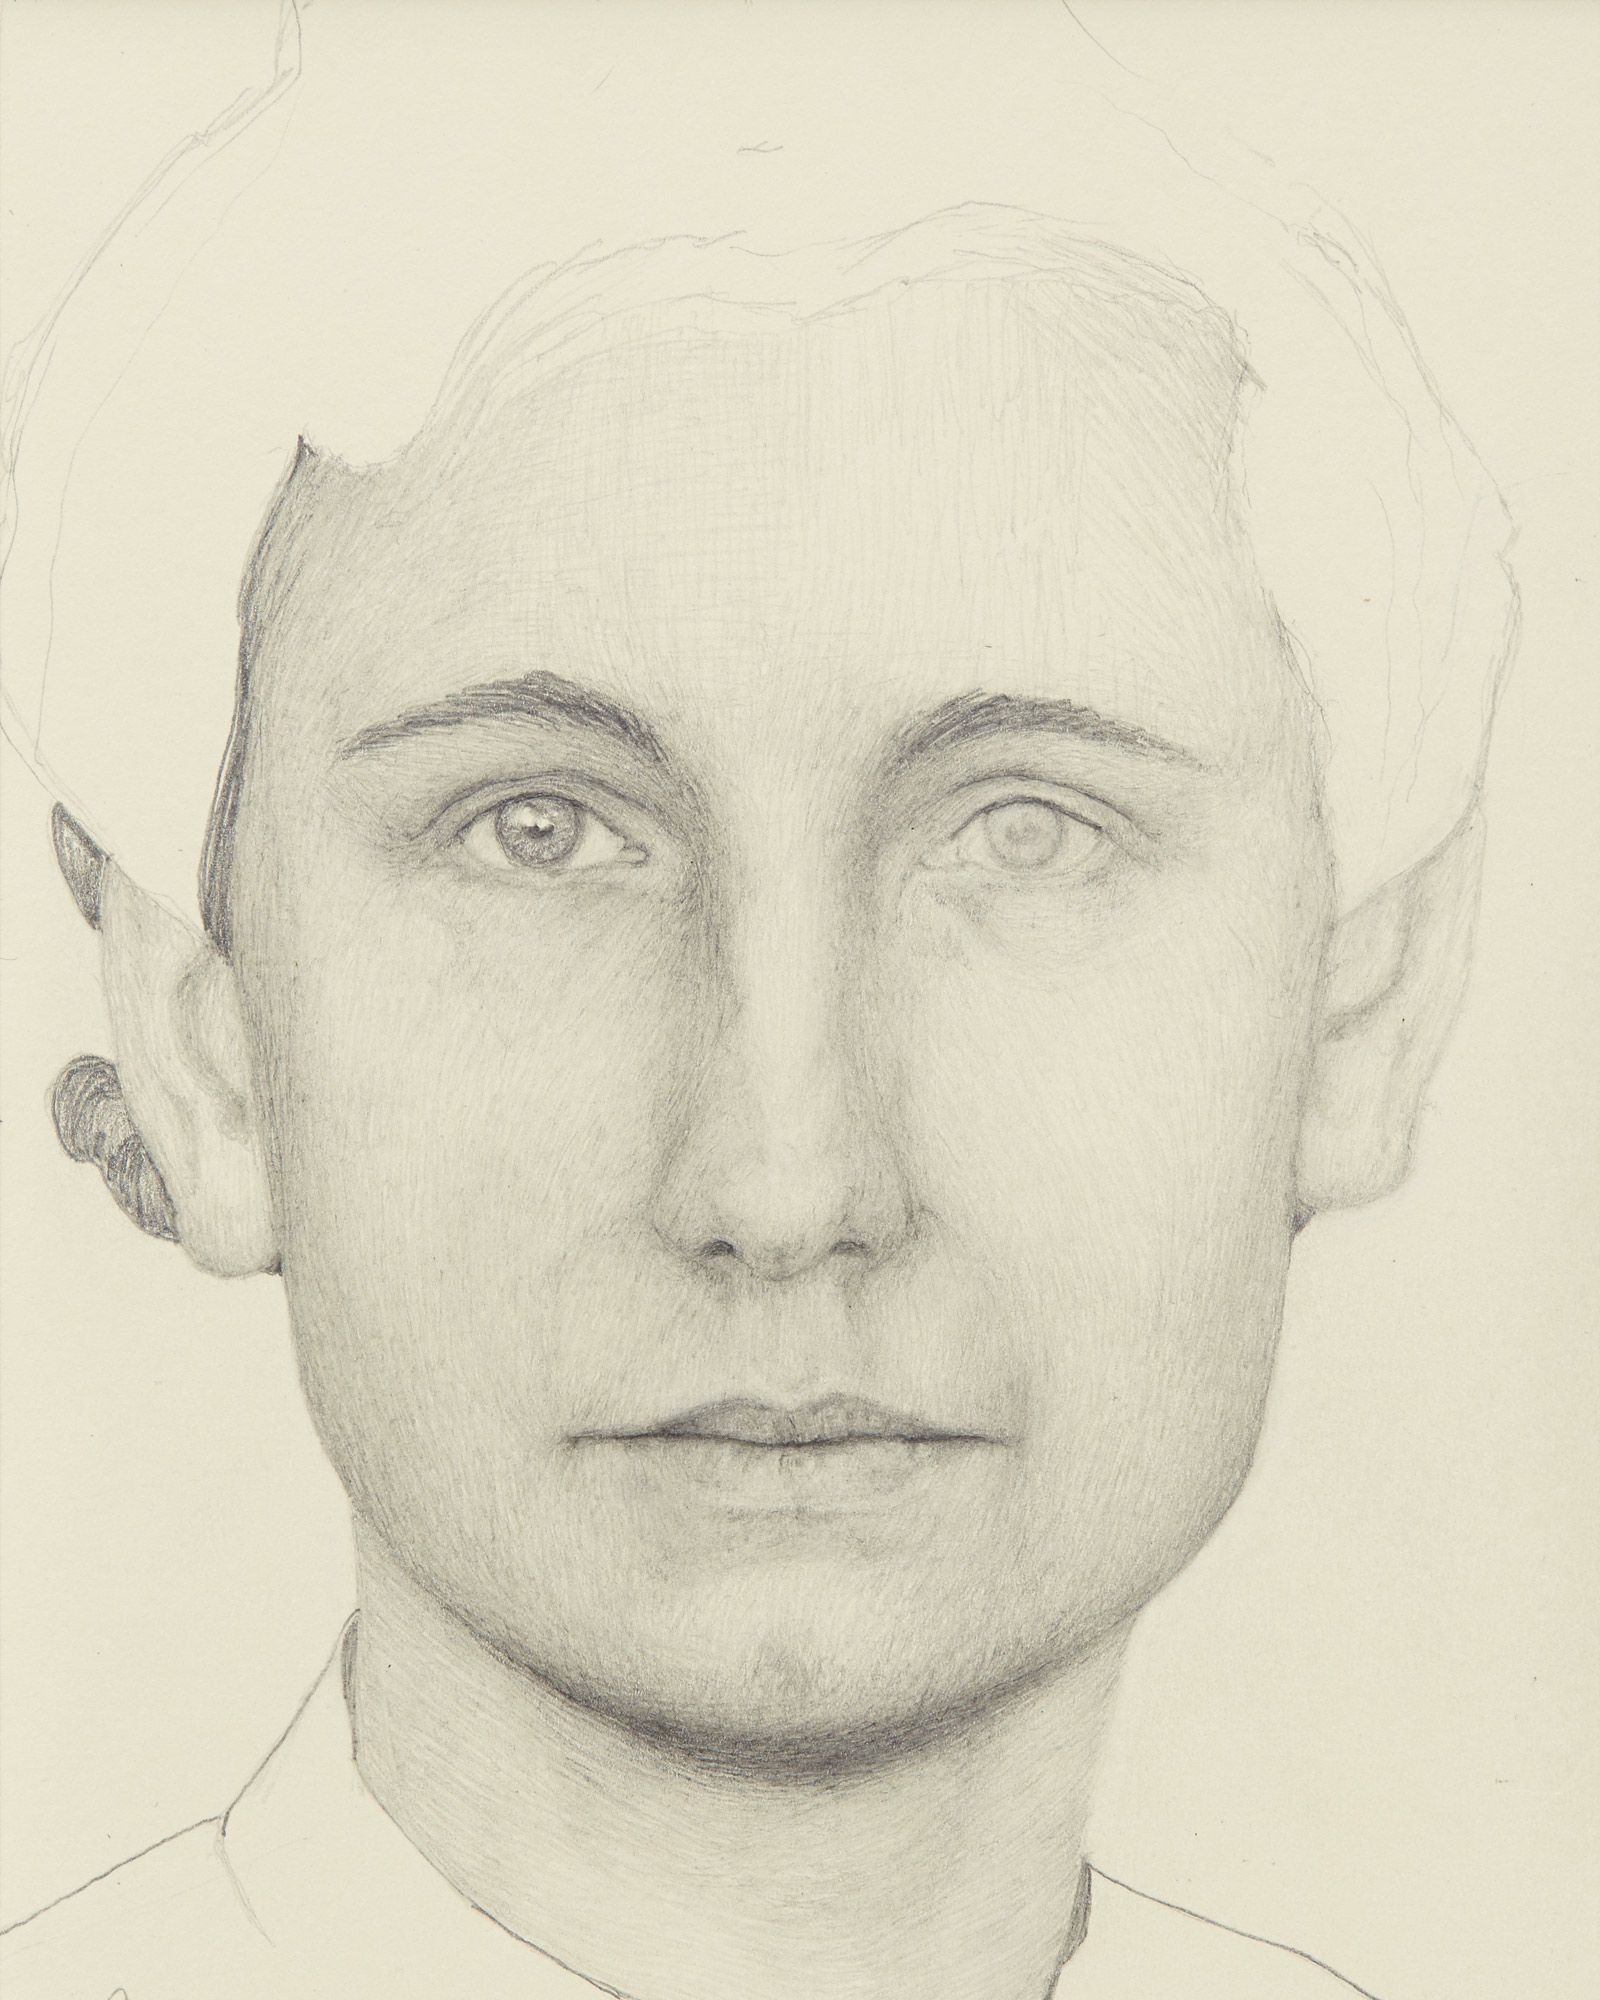 Detailed pencil sketch of a person's face with prominent eyes, unfinished hair outlines, and subtle facial features on a light background.